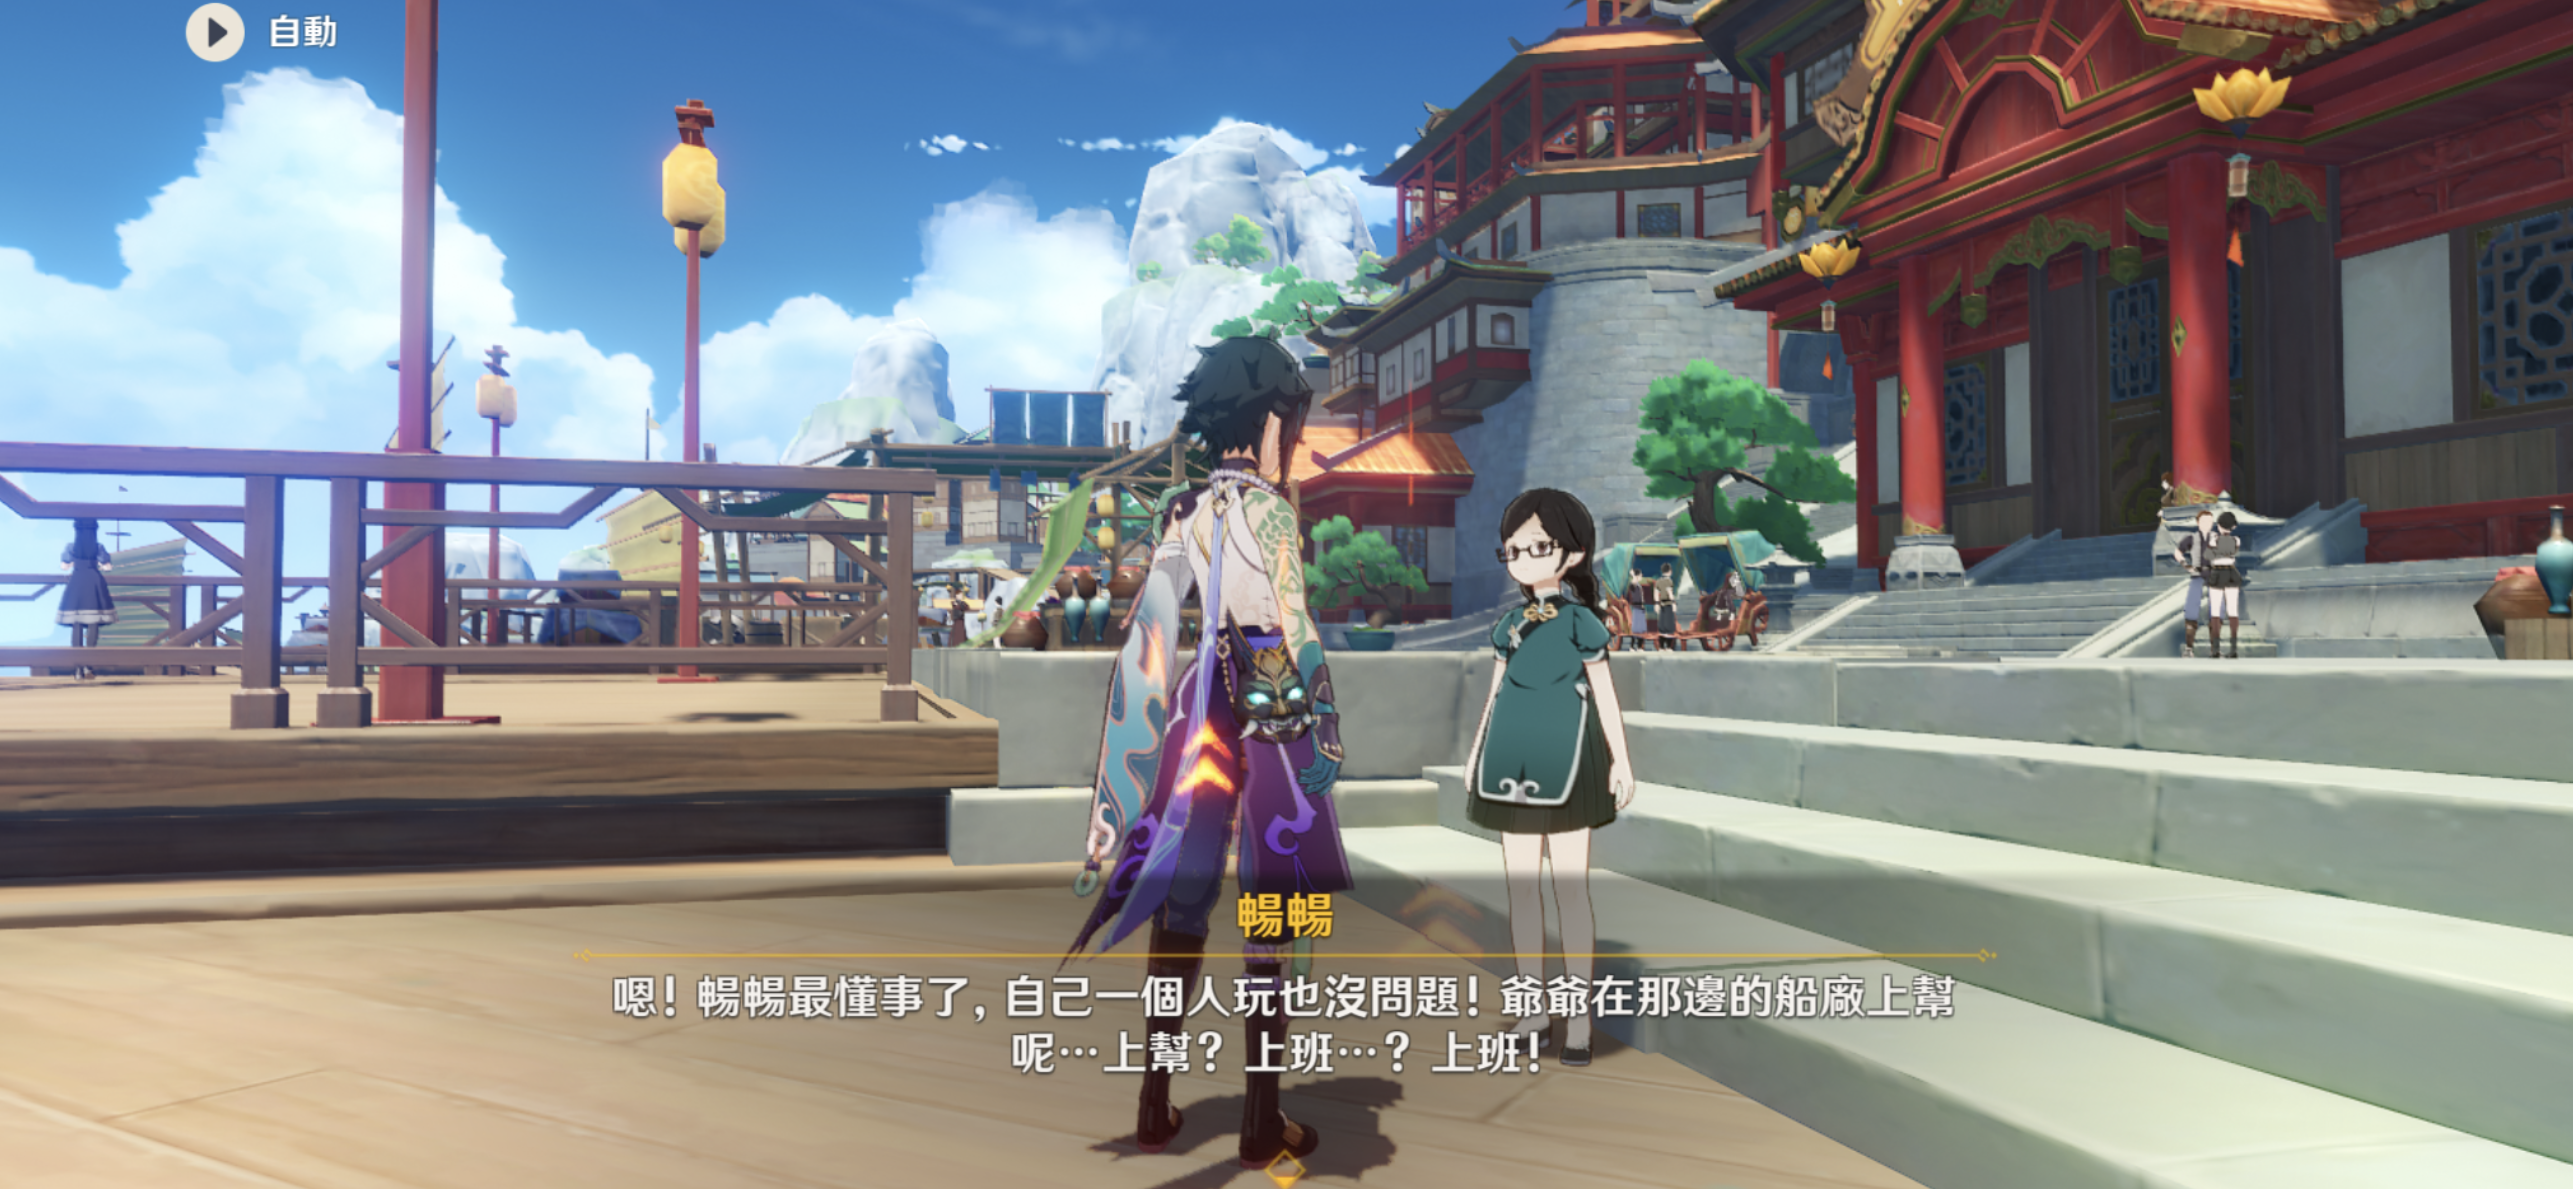 Screenshot of a video game showing two characters talking in a city with Chinese-looking buildings and mountains visible in the distance. A little girl is talking and the dialogue is displayed in Chinese on the screen.